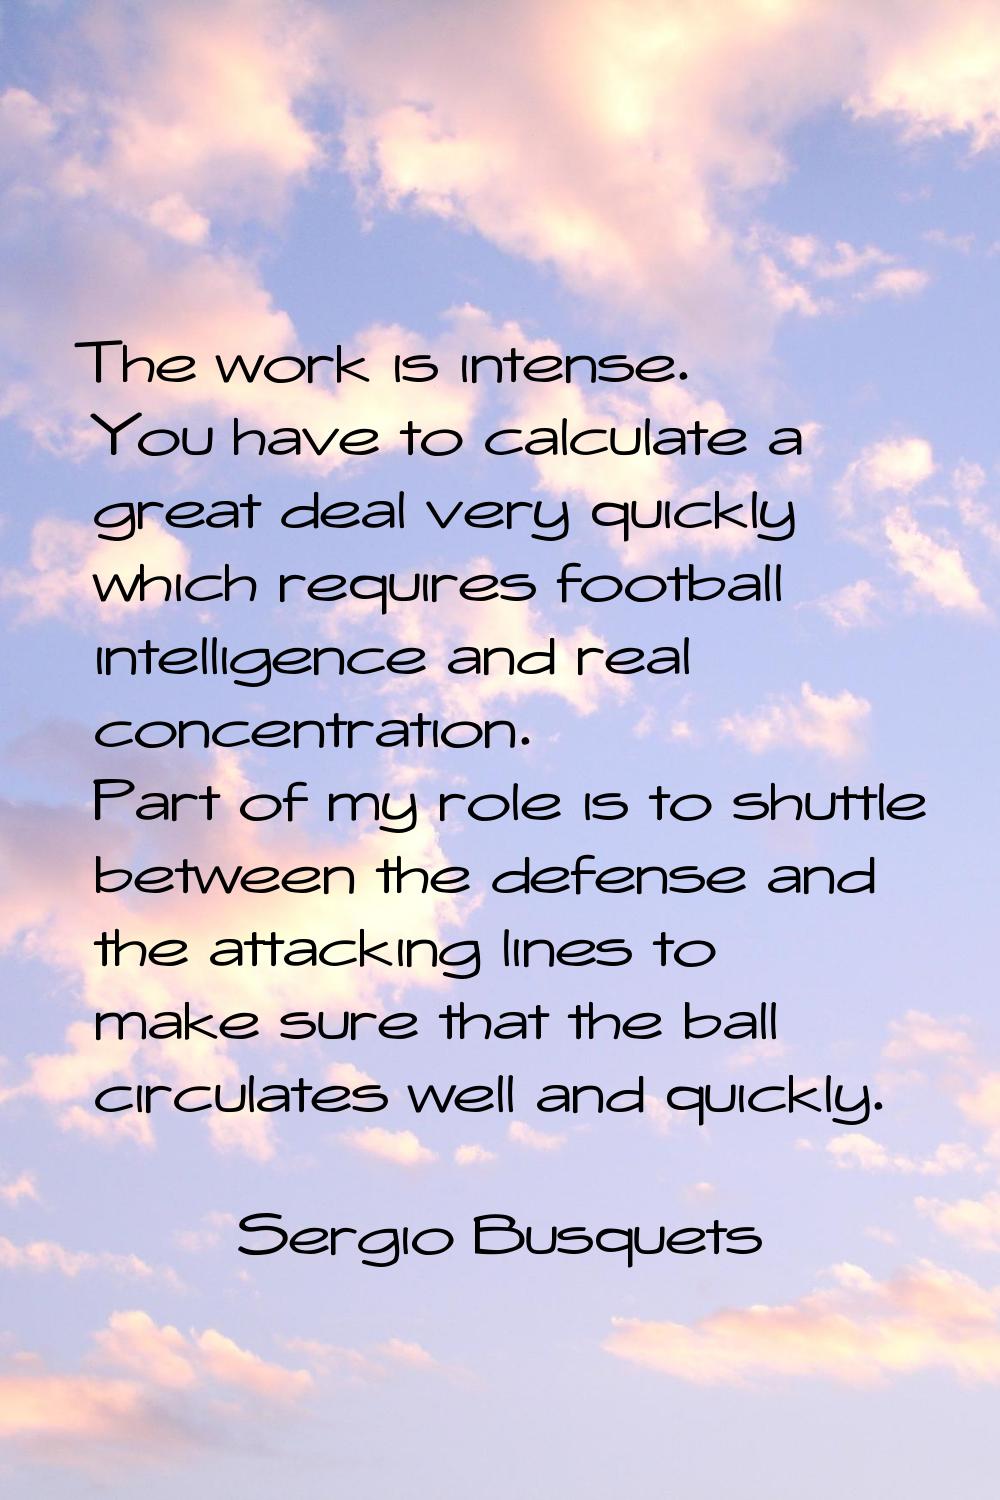 The work is intense. You have to calculate a great deal very quickly which requires football intell